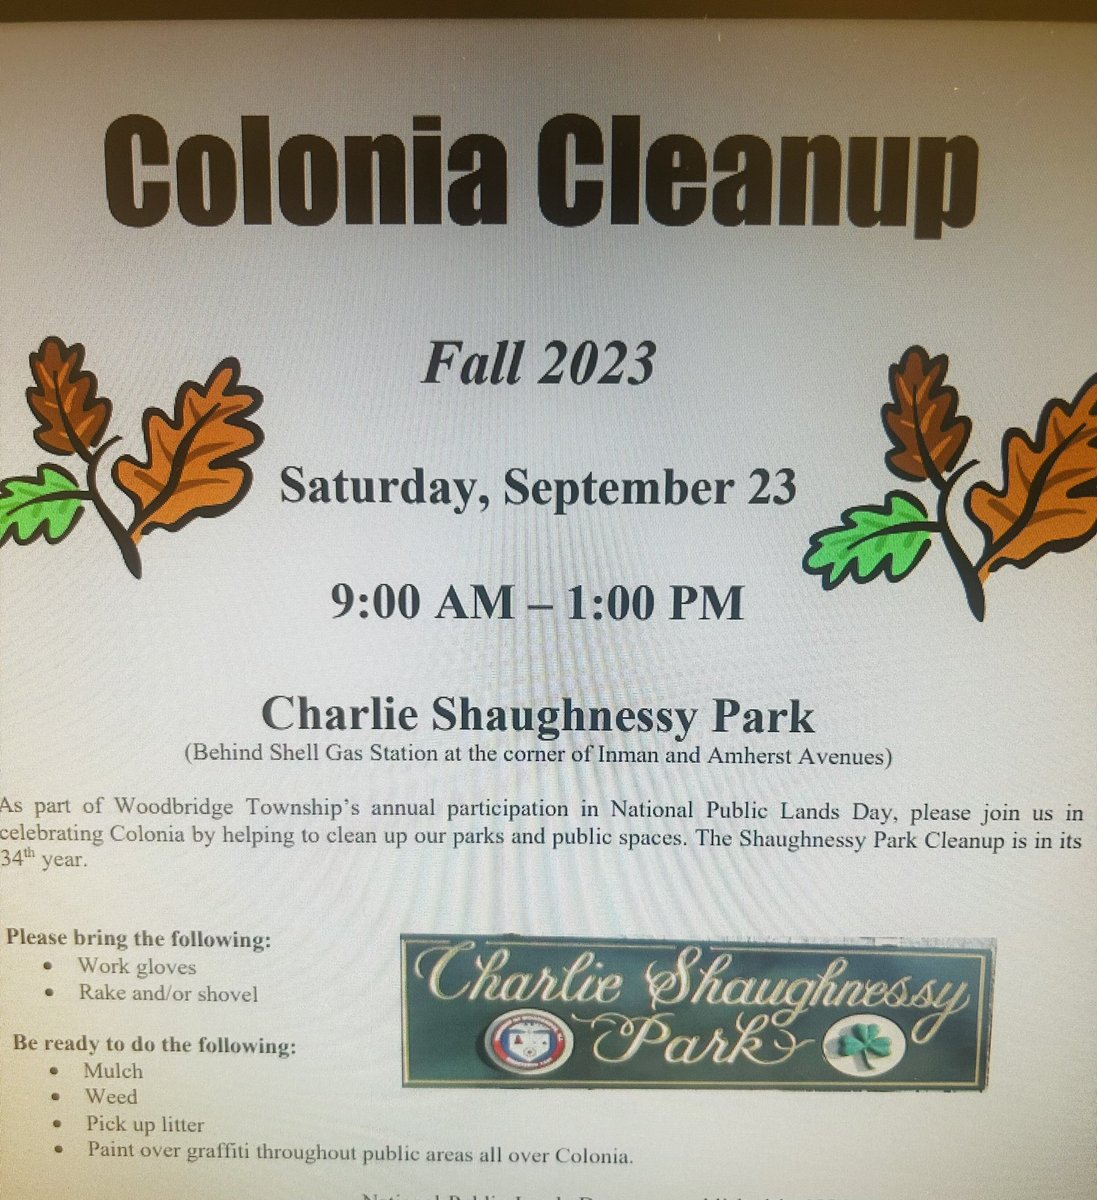 Hey Mustangs! Help the community and earn volunteer hours at the same time! Colonia Cleanup is 9/23. @EllenPaloti @MrsShortJFK @blauvelt_tracy